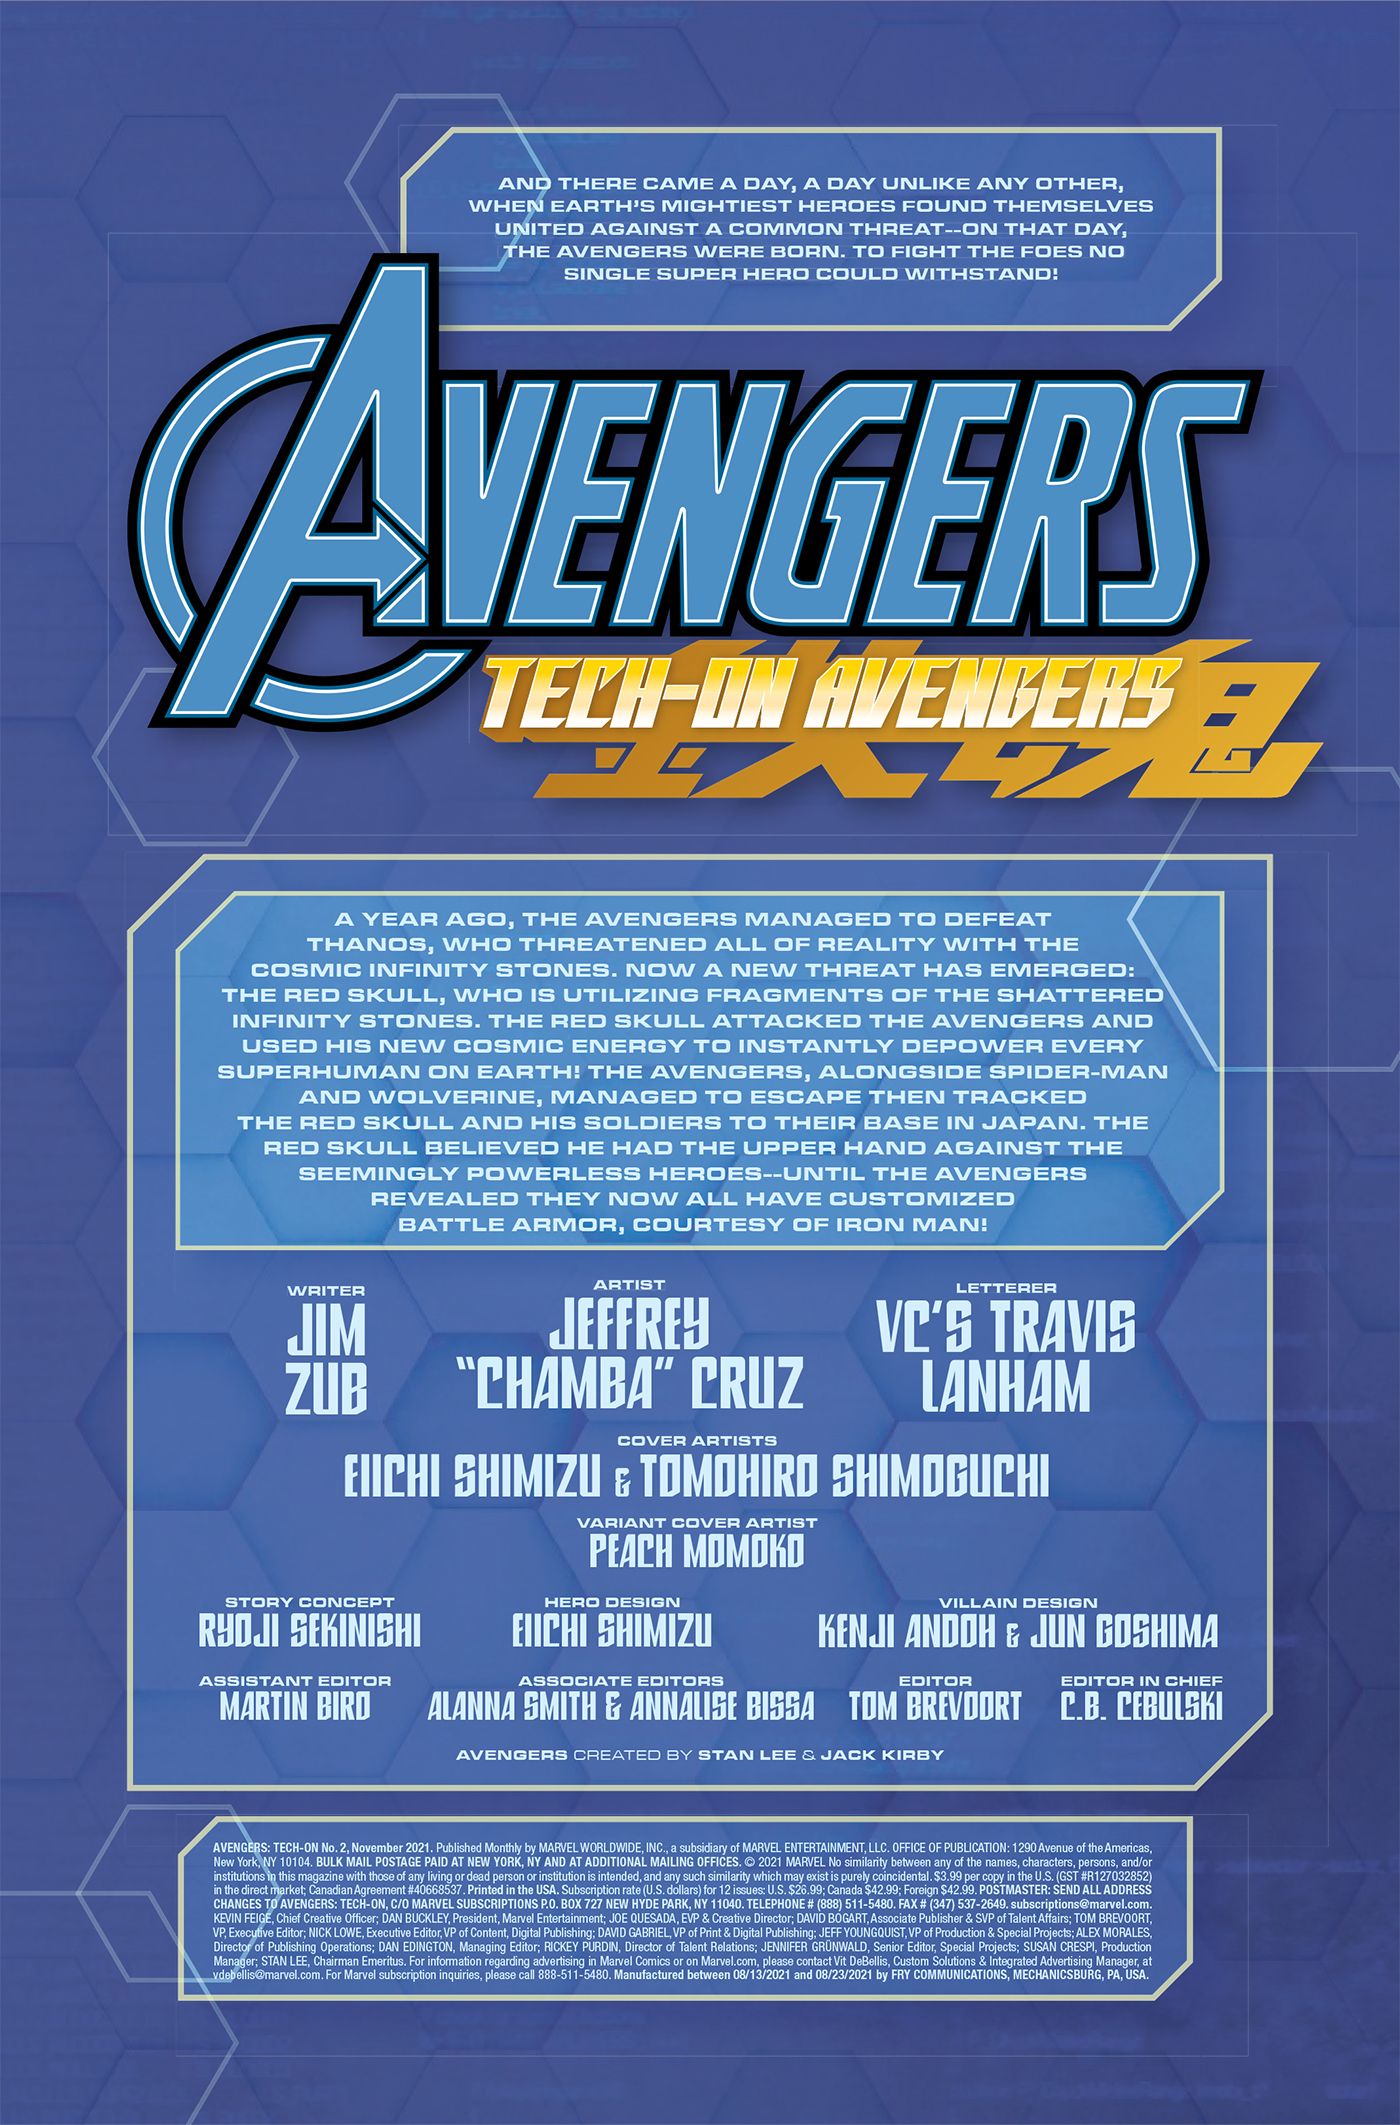 A recap of the events of Avengers: Tech-On #1.